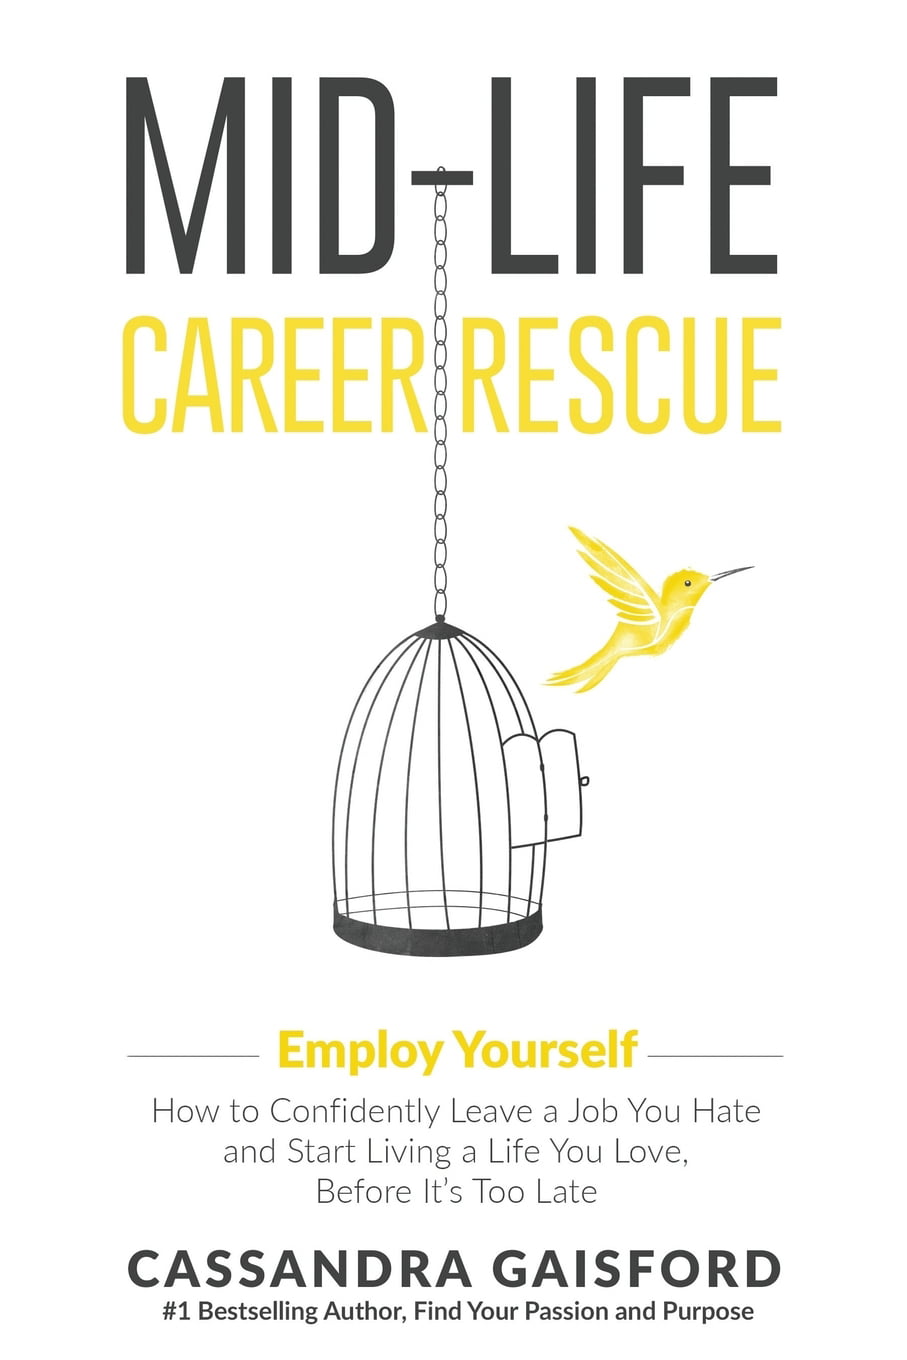 Are you leaving your life. Life and career. Start Living Life. Leaving a Life leaving a job.